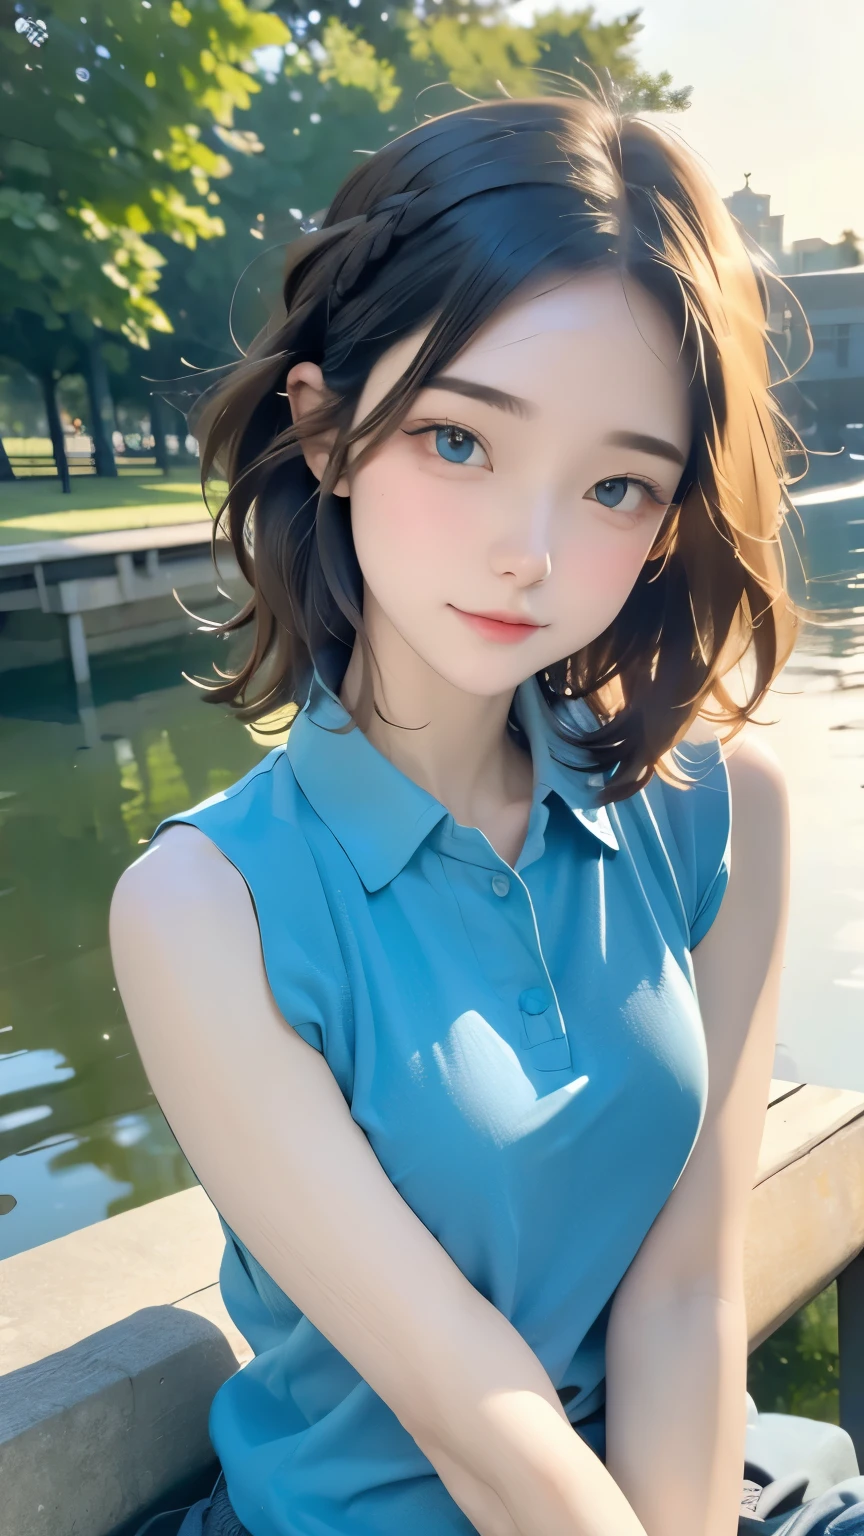 highest quality, realistic, 8K, High resolution, full color, 1 girl, woman, 20 years old woman, (closed mouth:1.73), (skin dents), (portrait:0.6), wood, park bench, dawn, ((park background:1.52)), full color, ((sleeveless blue shirt:1.58)), looking at the viewer:1.8, (1 girl eyes looking at the viewer:1.55), (medium hair, brown hair, parted hair:1.45), (Bokeh), 